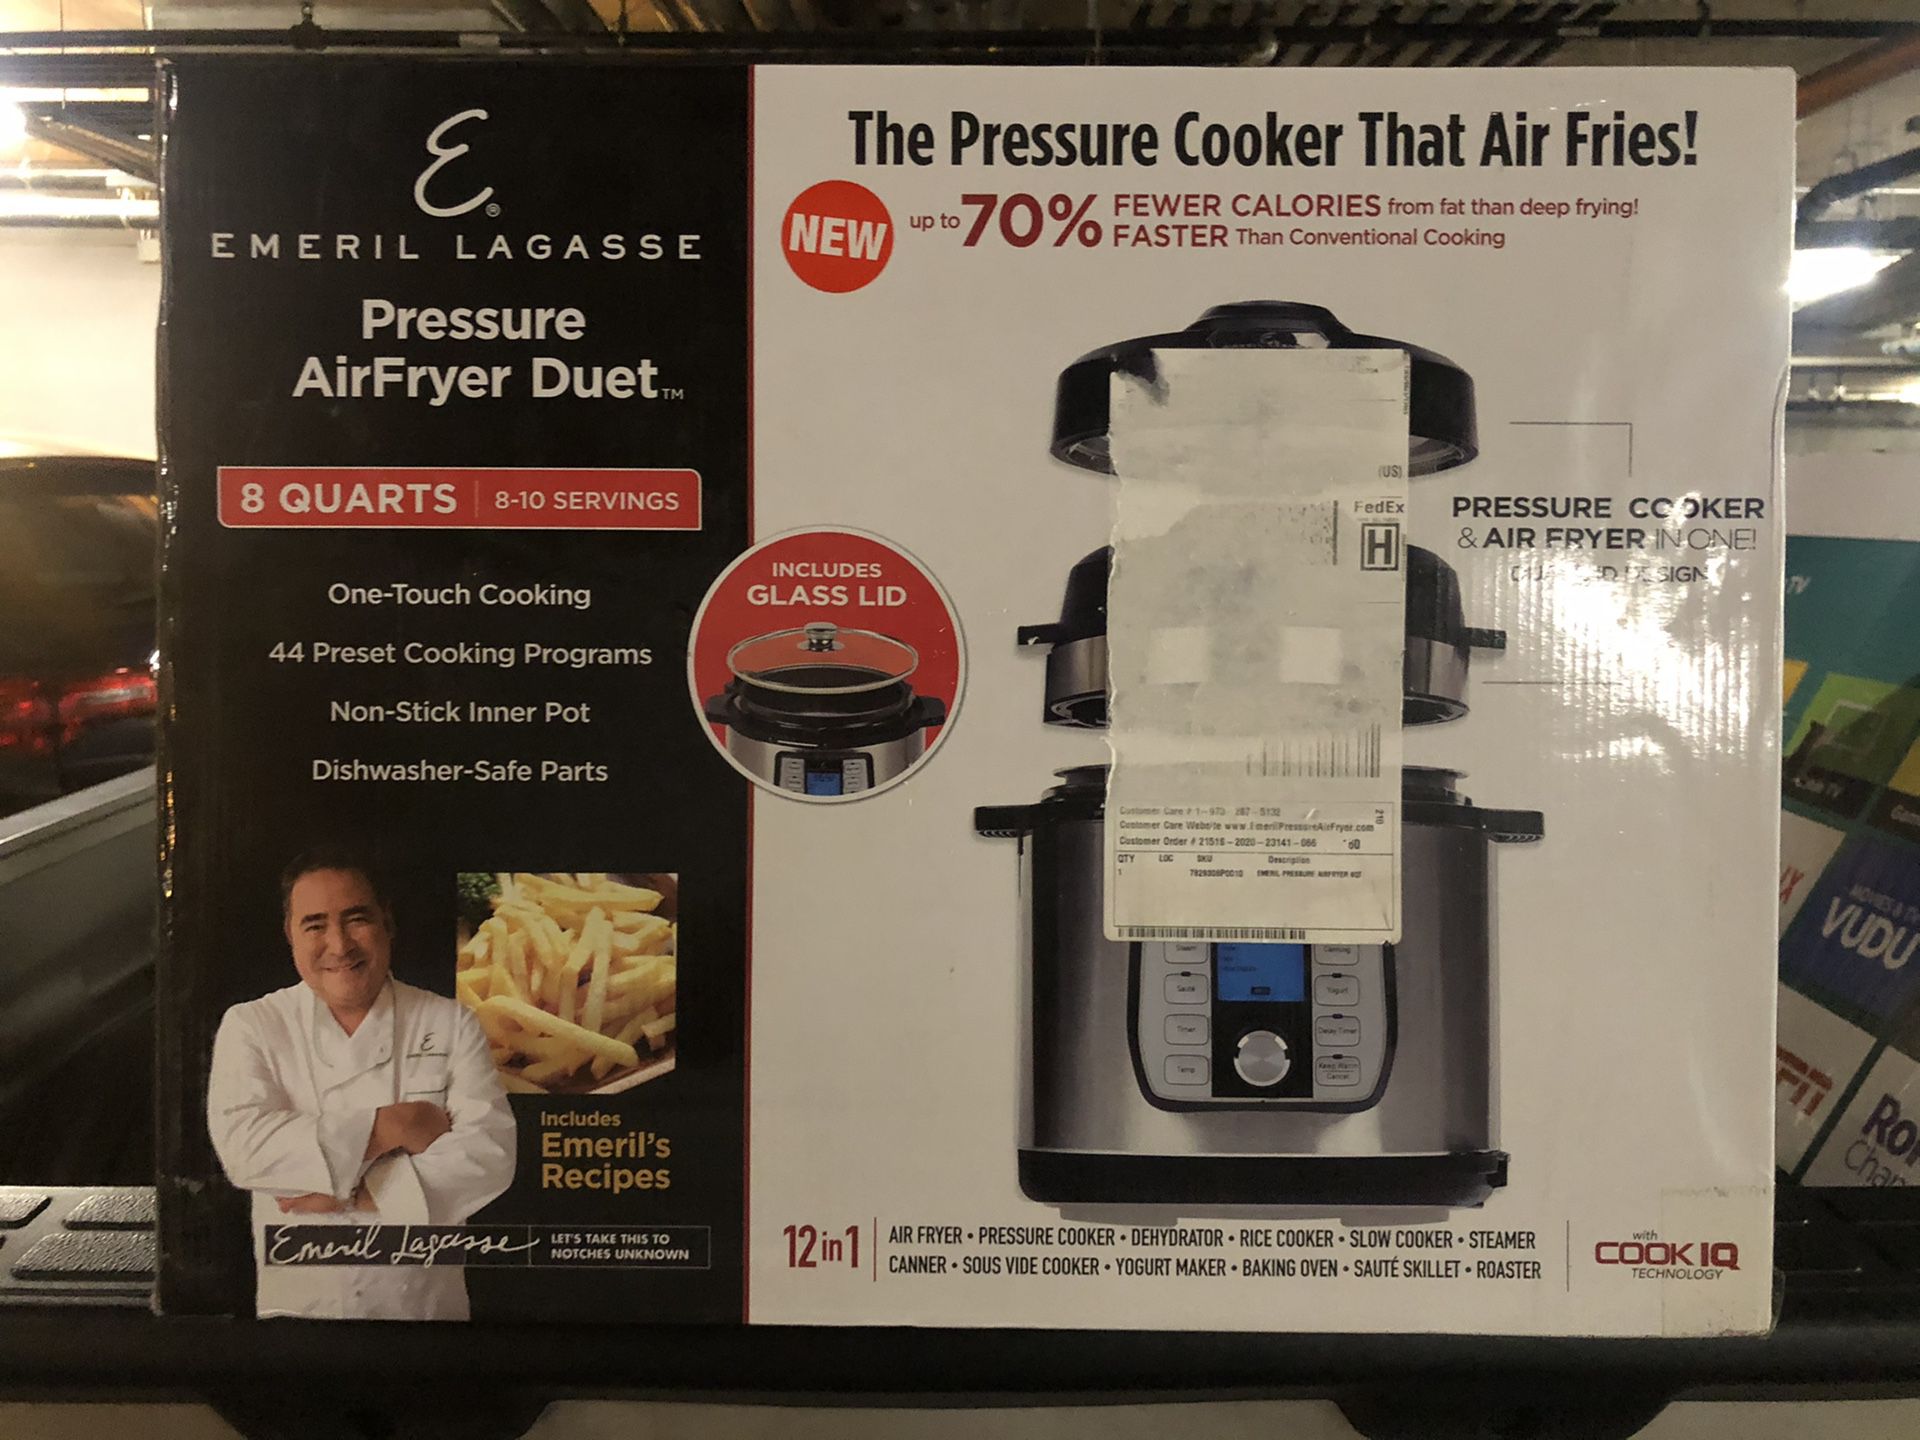 Pressure AirFryer Duet (Emiril Lagasse) brand new in the box